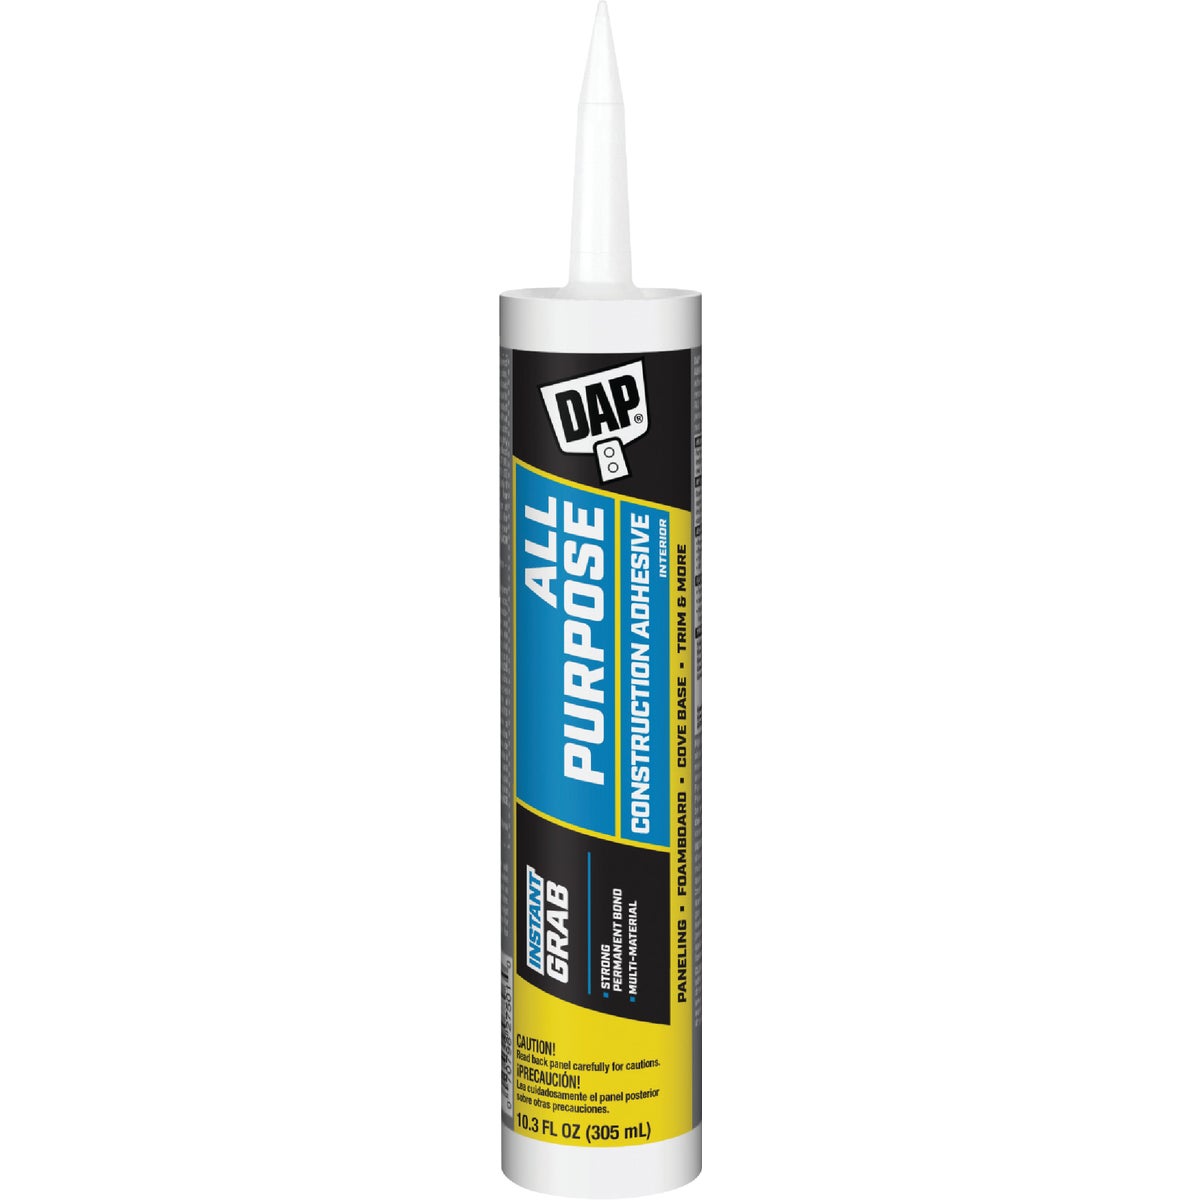 Item 771501, DAP All Purpose construction adhesive is a premium grade adhesive ideal for